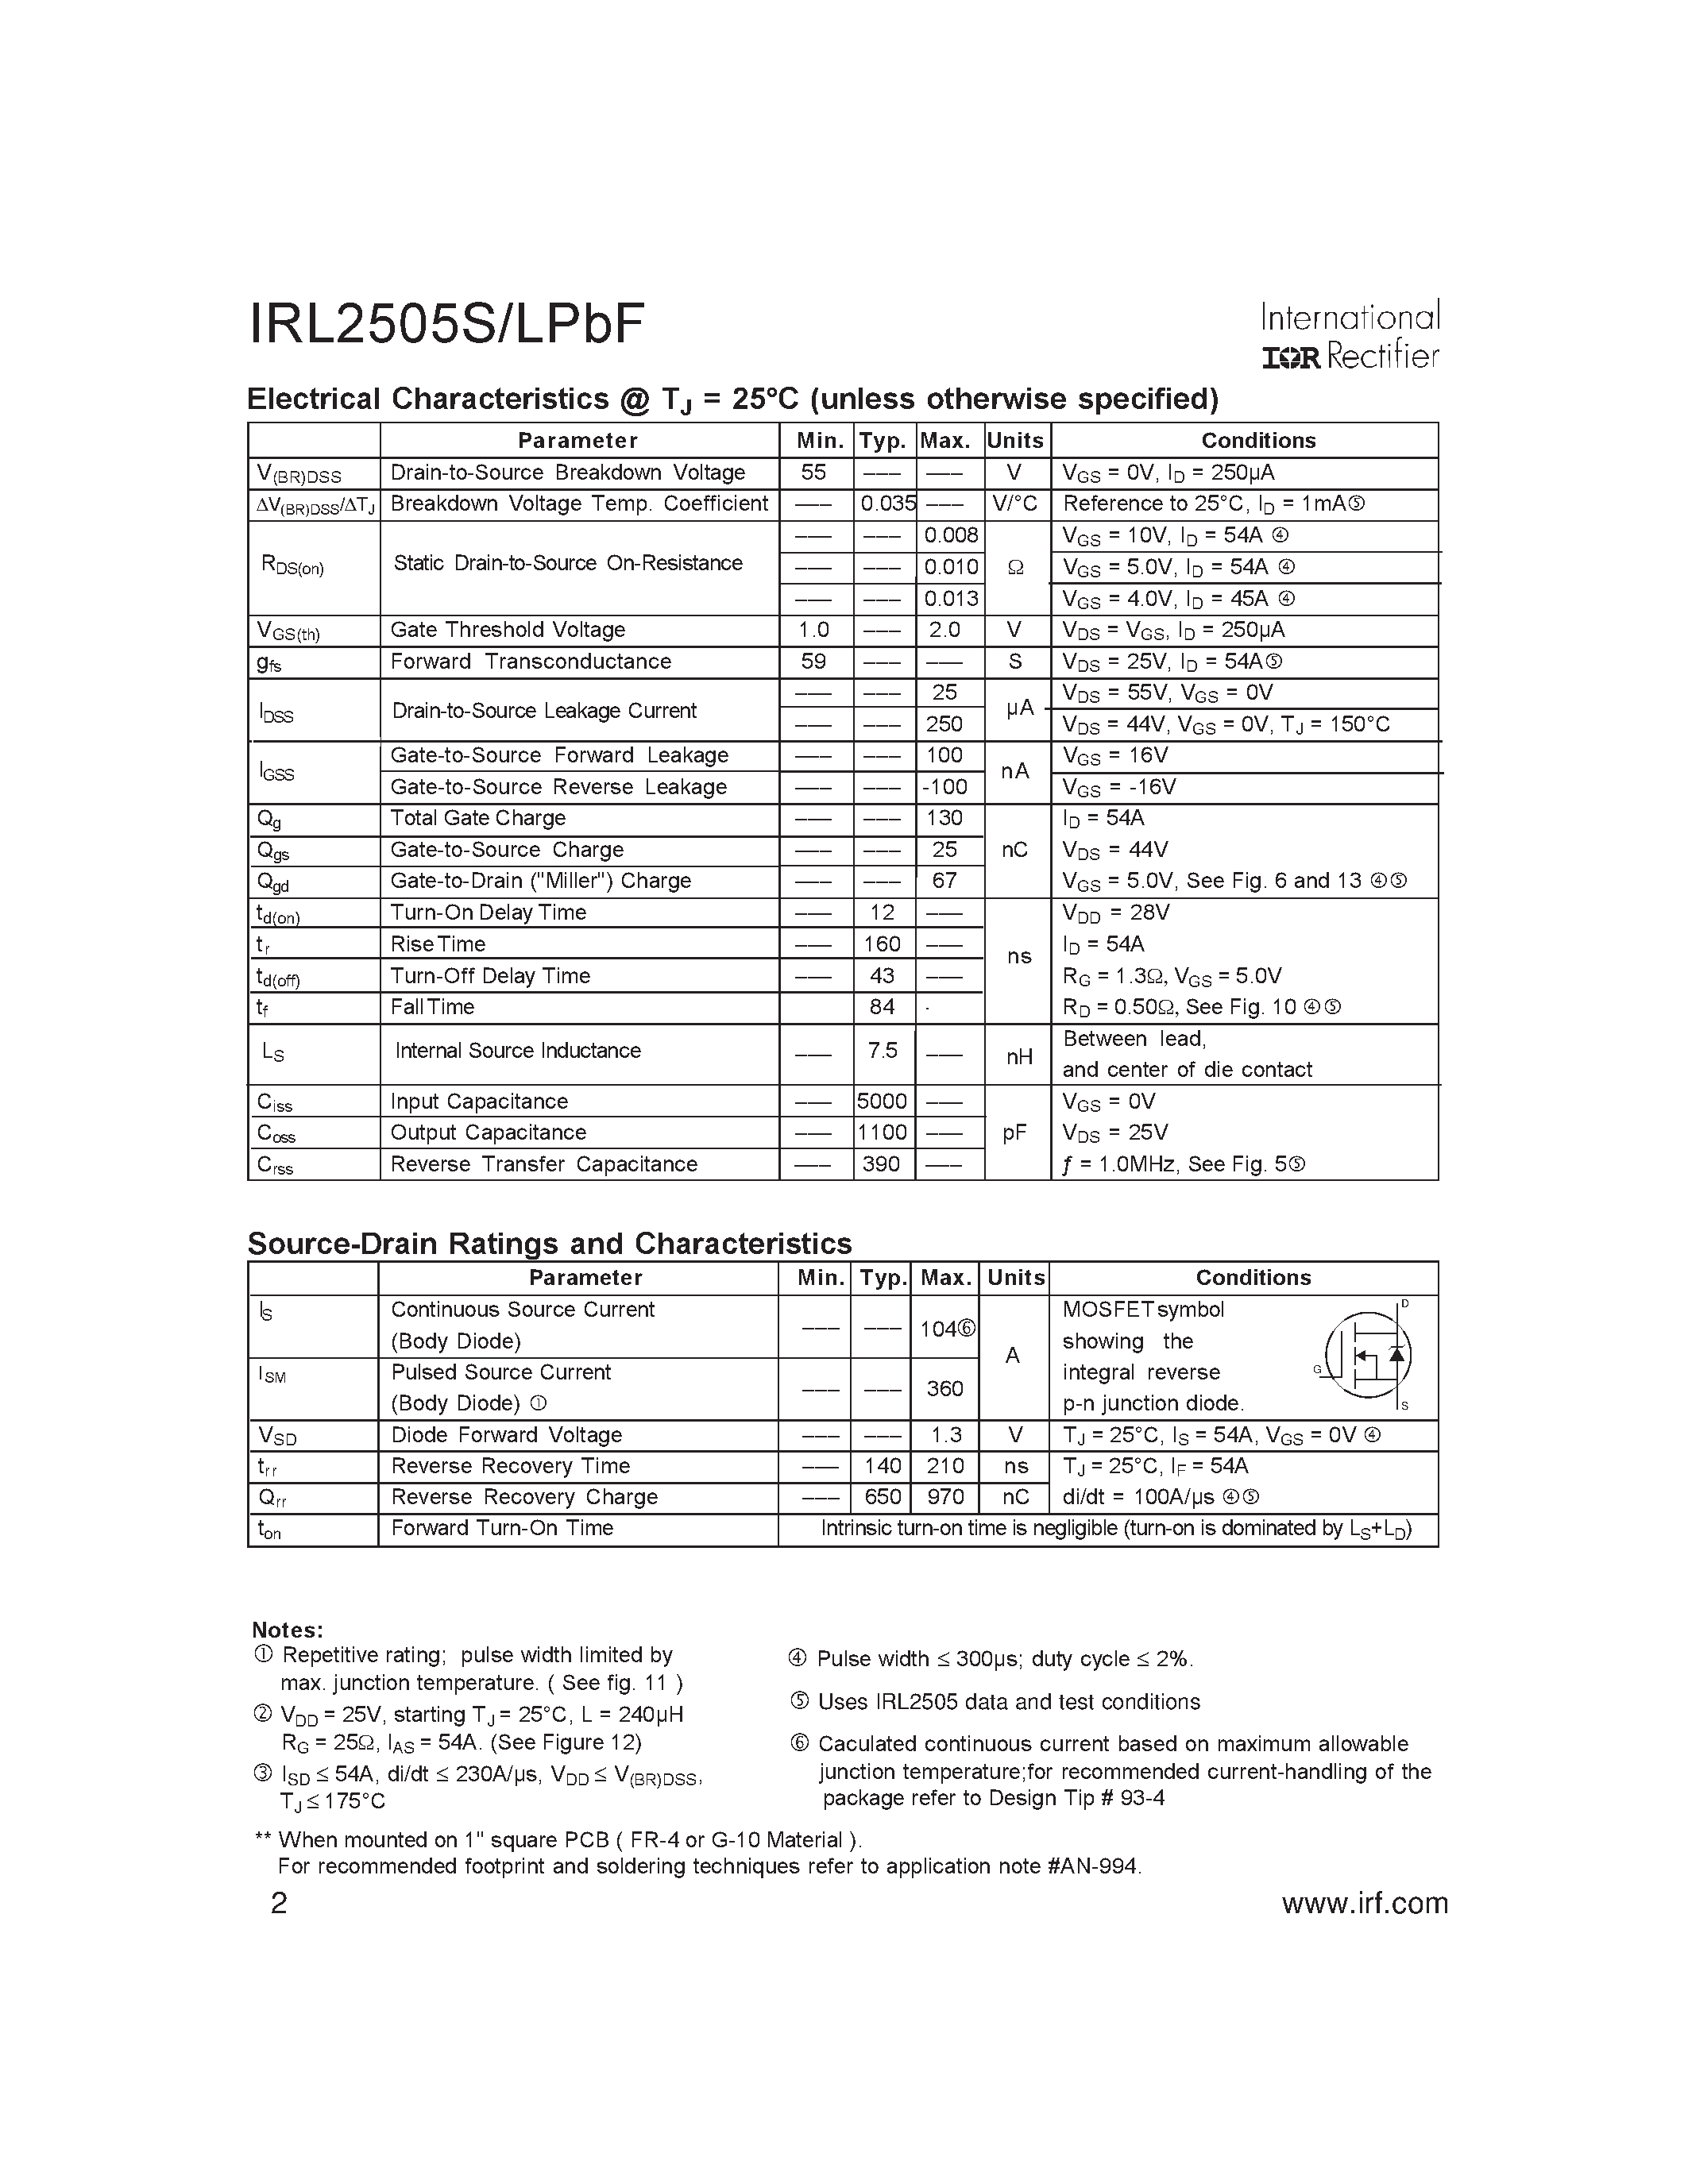 Datasheet IRL2505LPBF - HEXFET Power MOSFET page 2